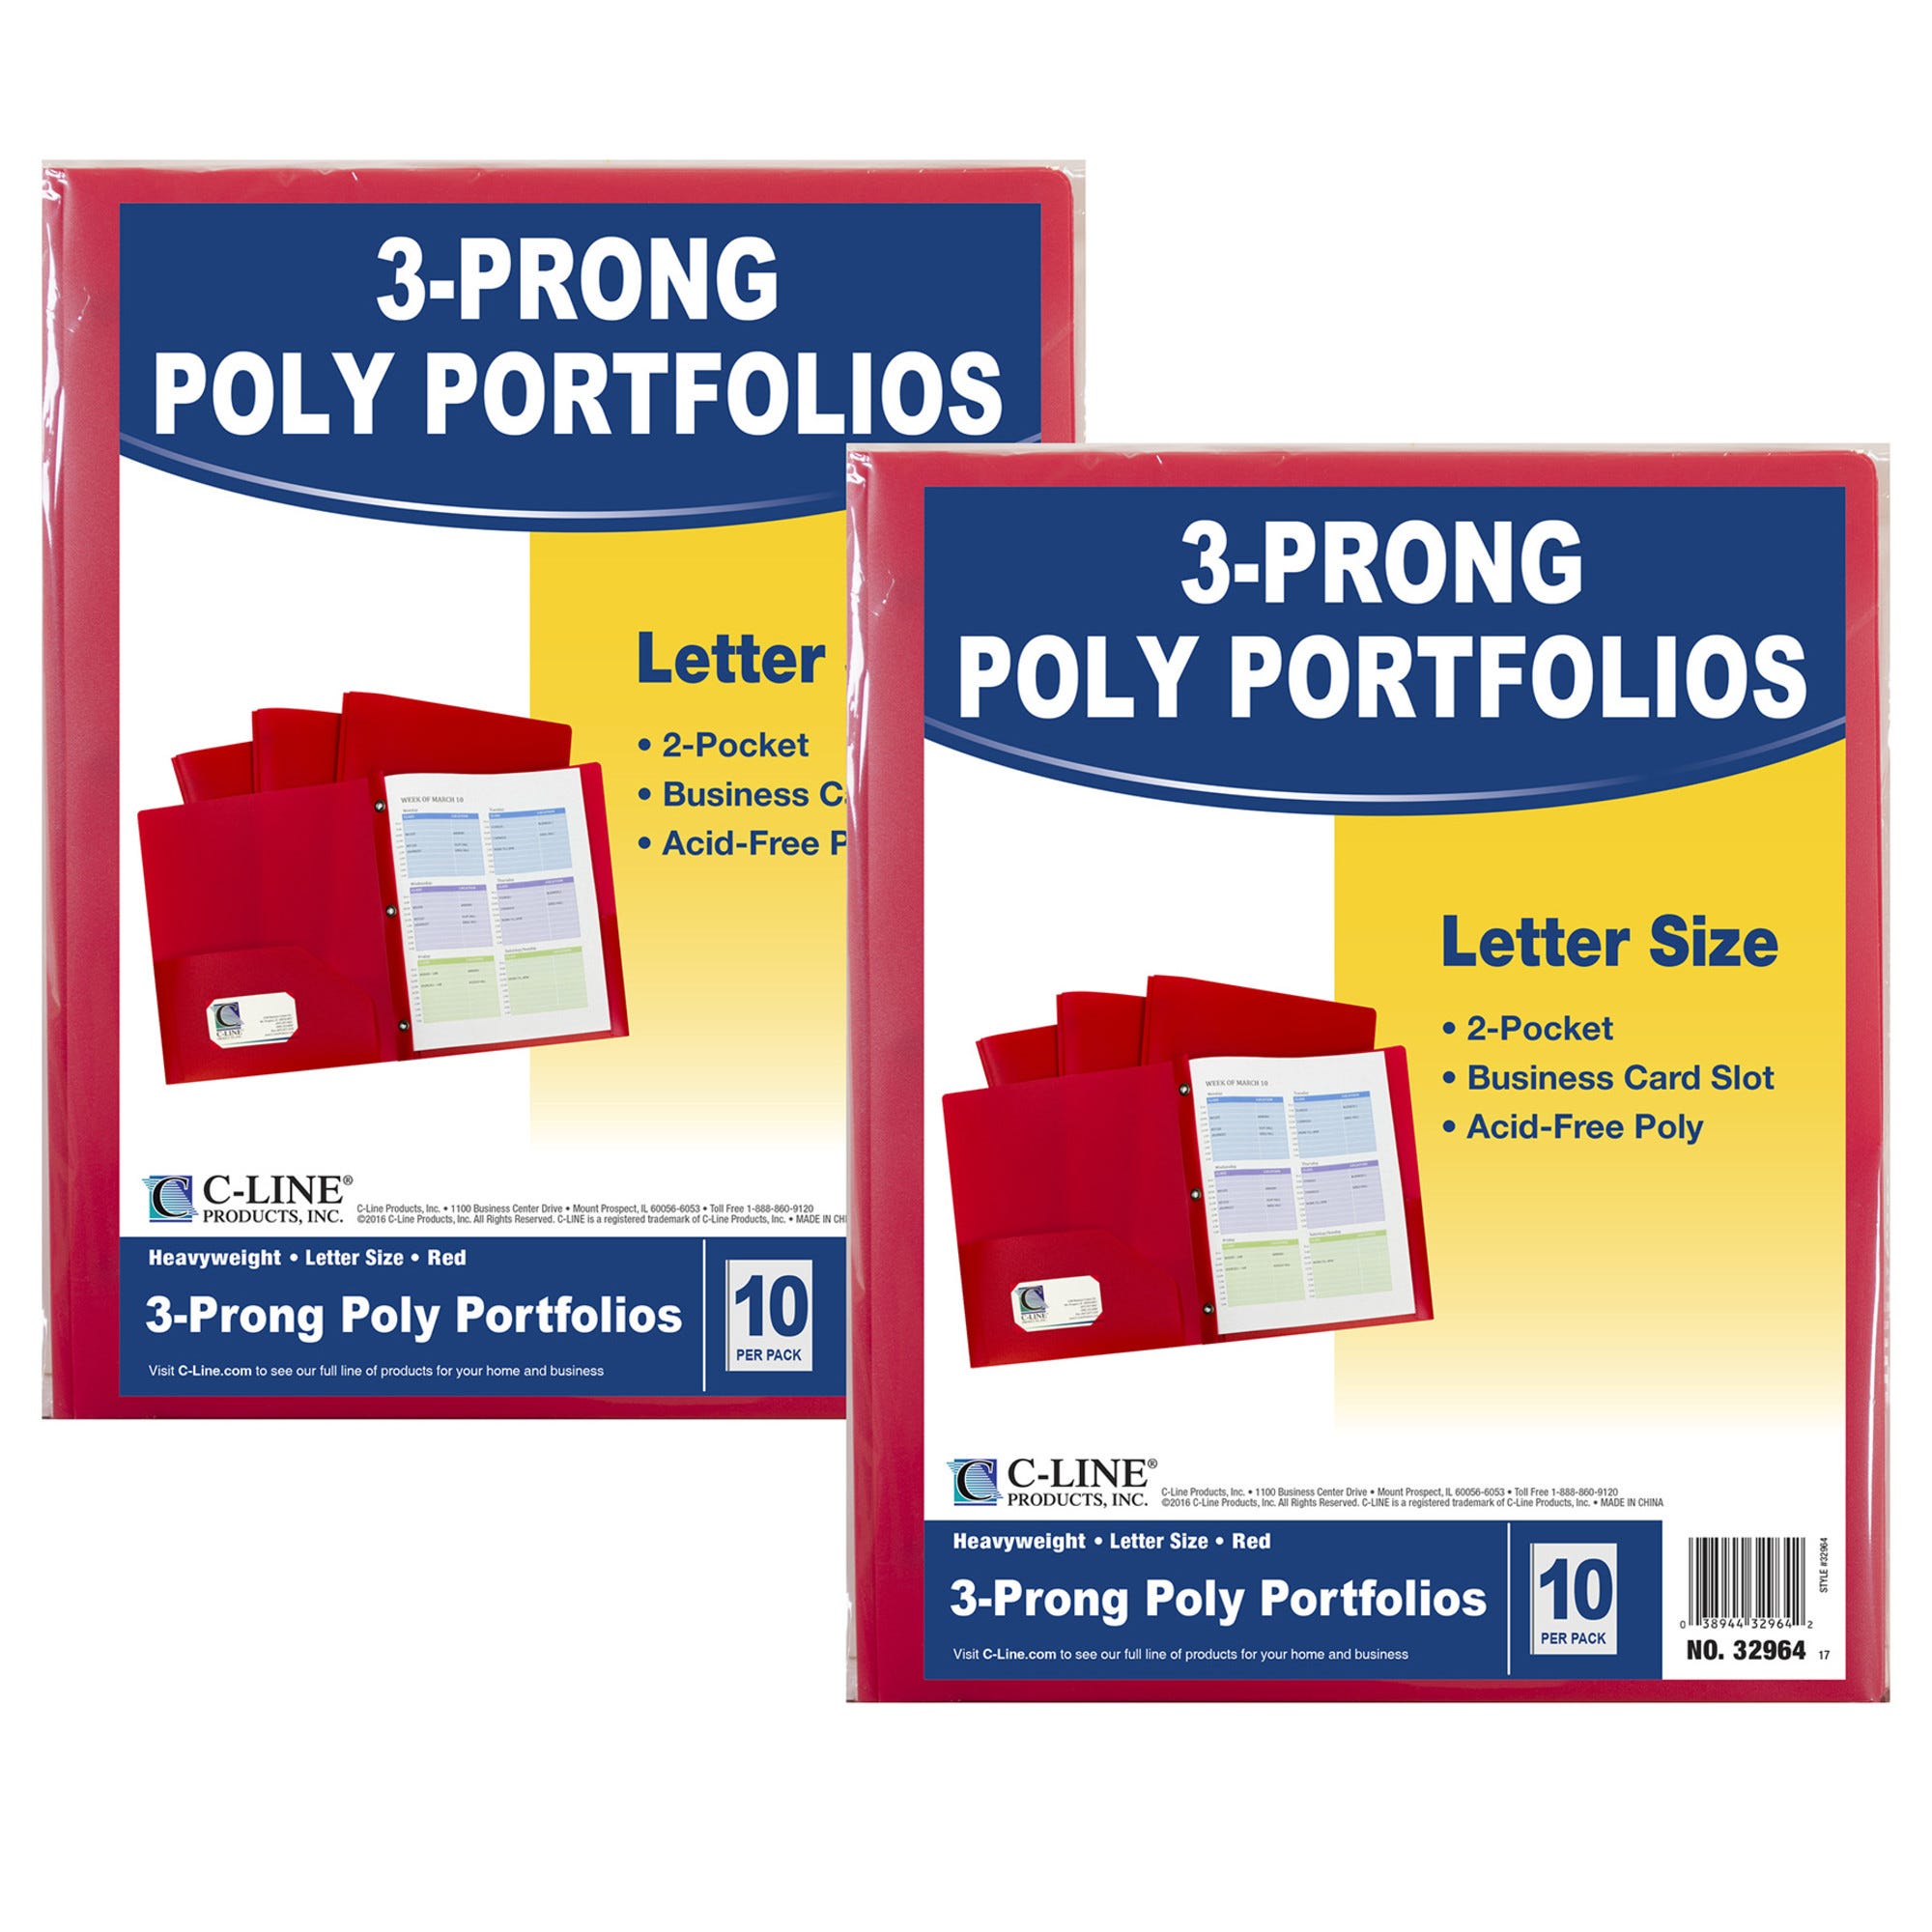 Letter Size 6-Pack 2 Pocket Heavyweight Poly Portfolio with Prongs 5-Pack w...